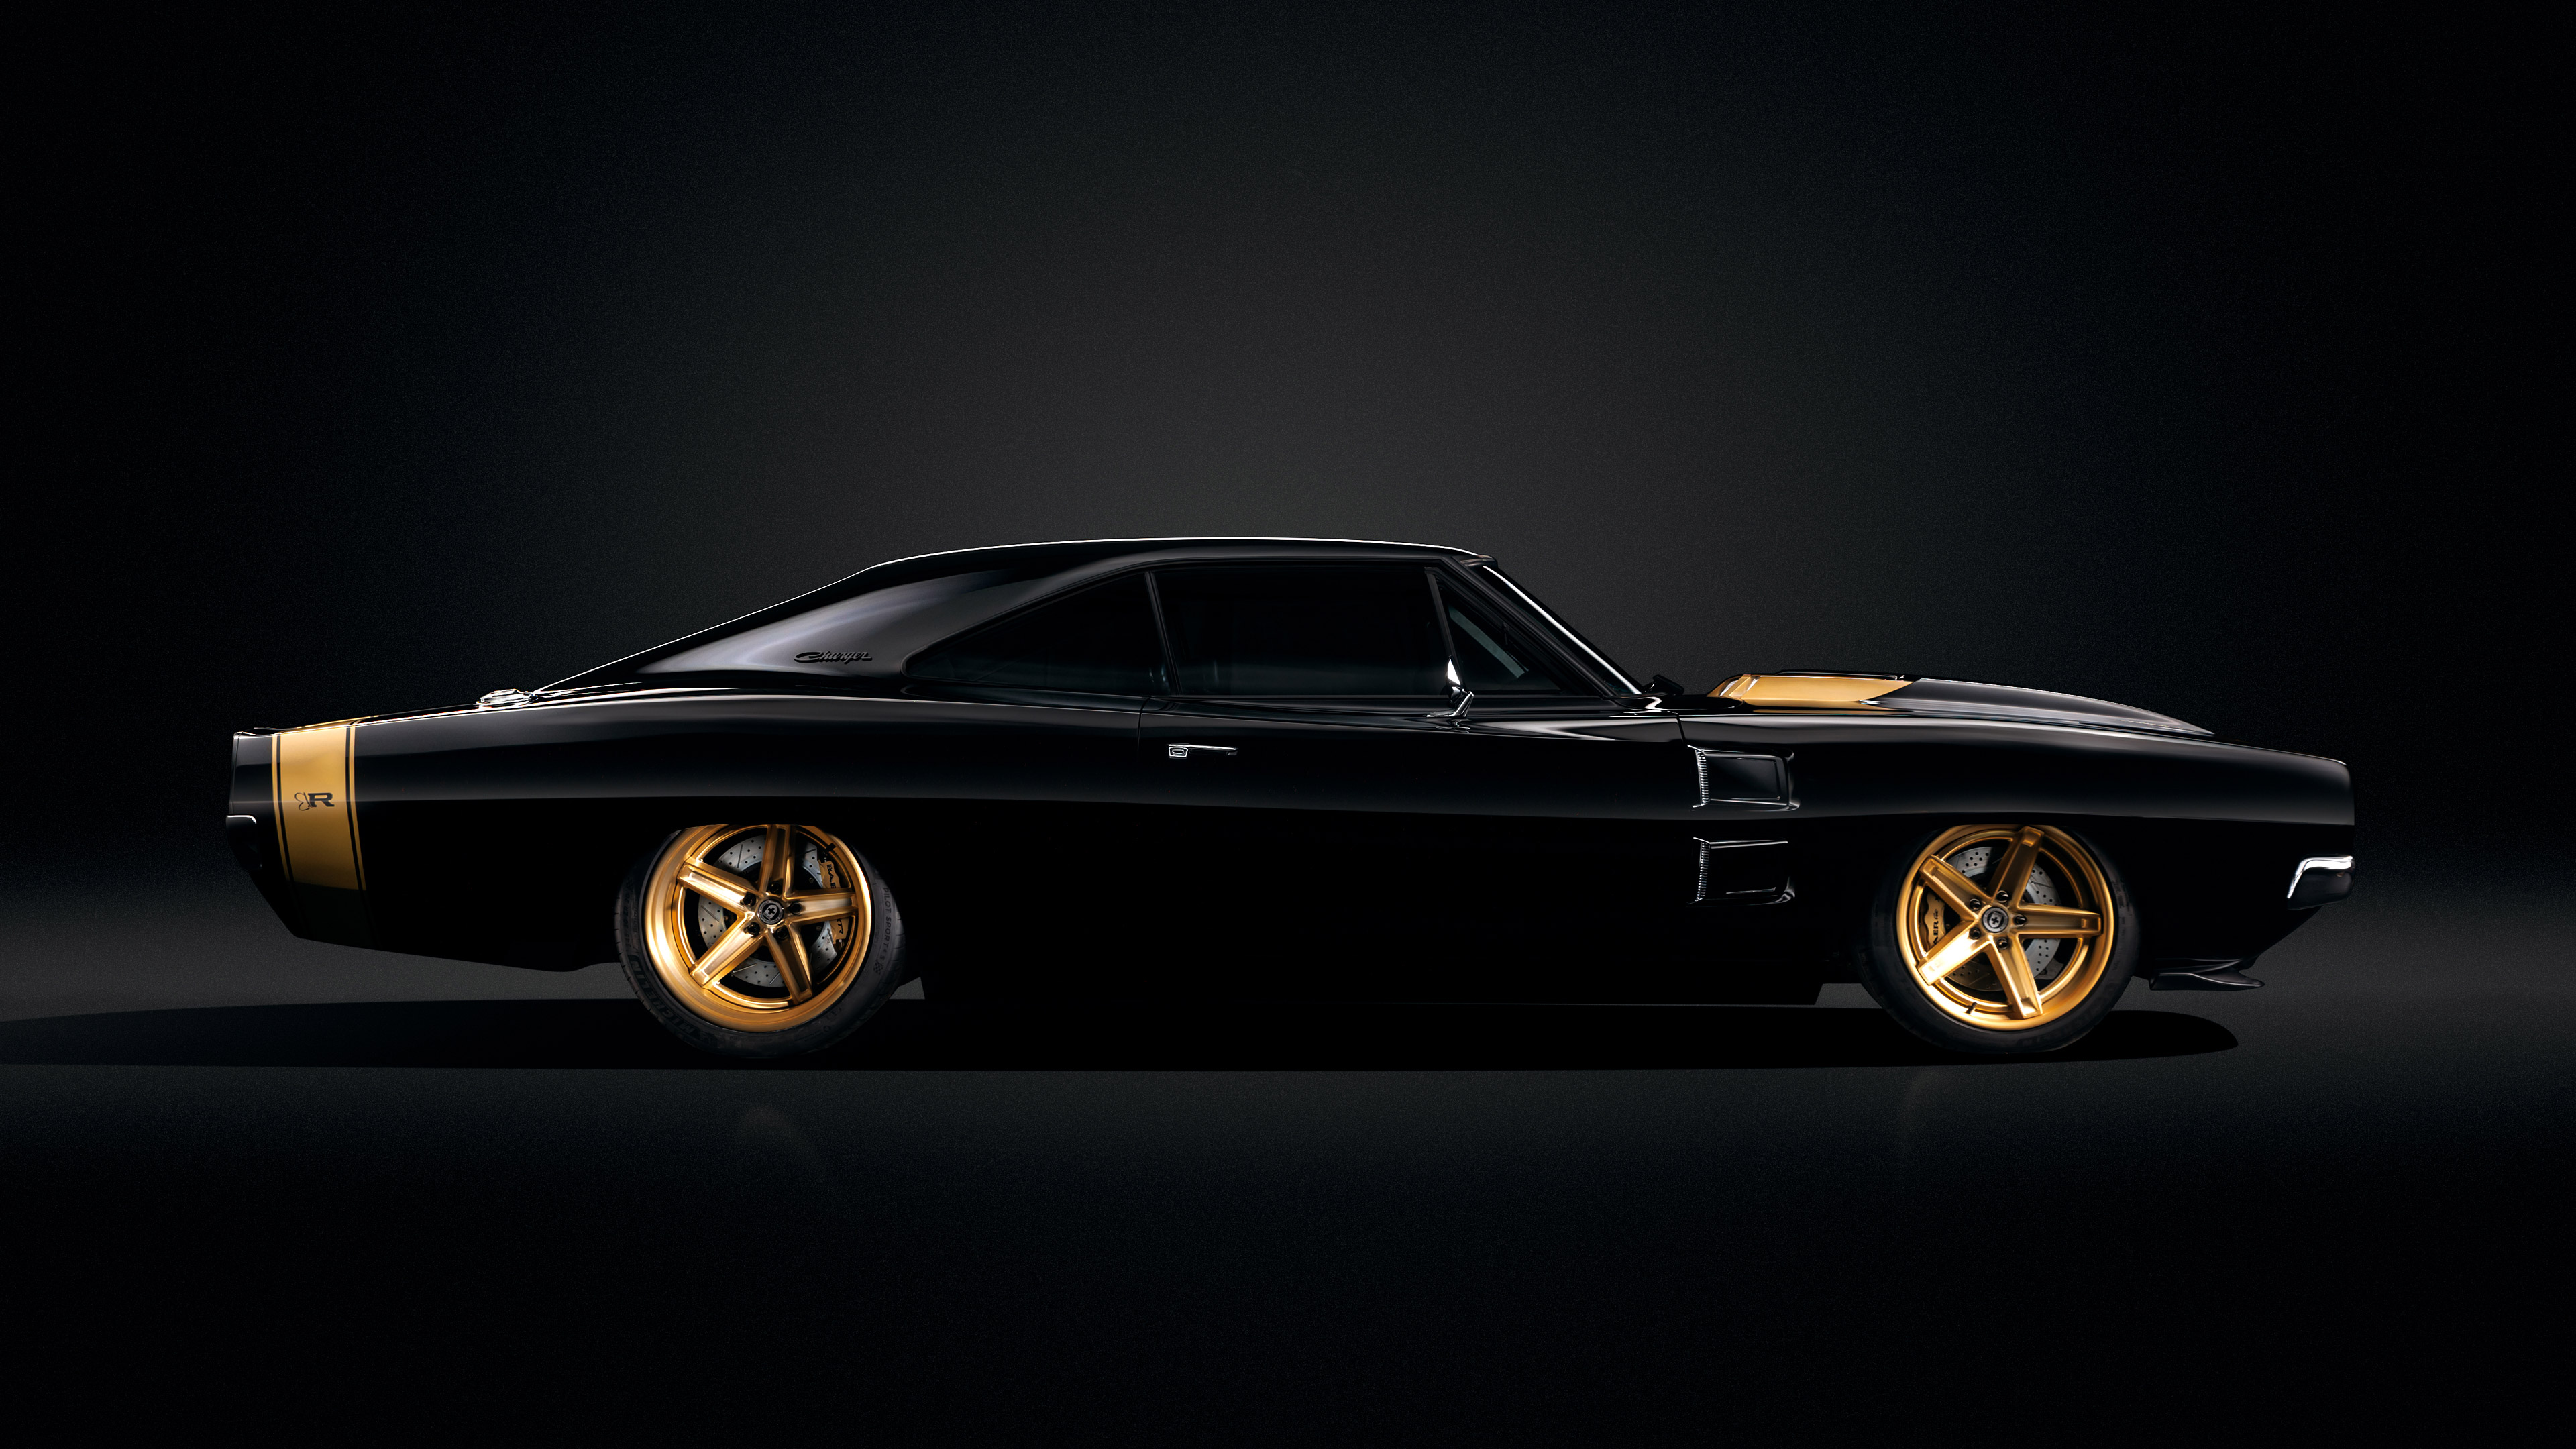  1969 Ringbrothers Dodge Charger Tusk Wallpaper.